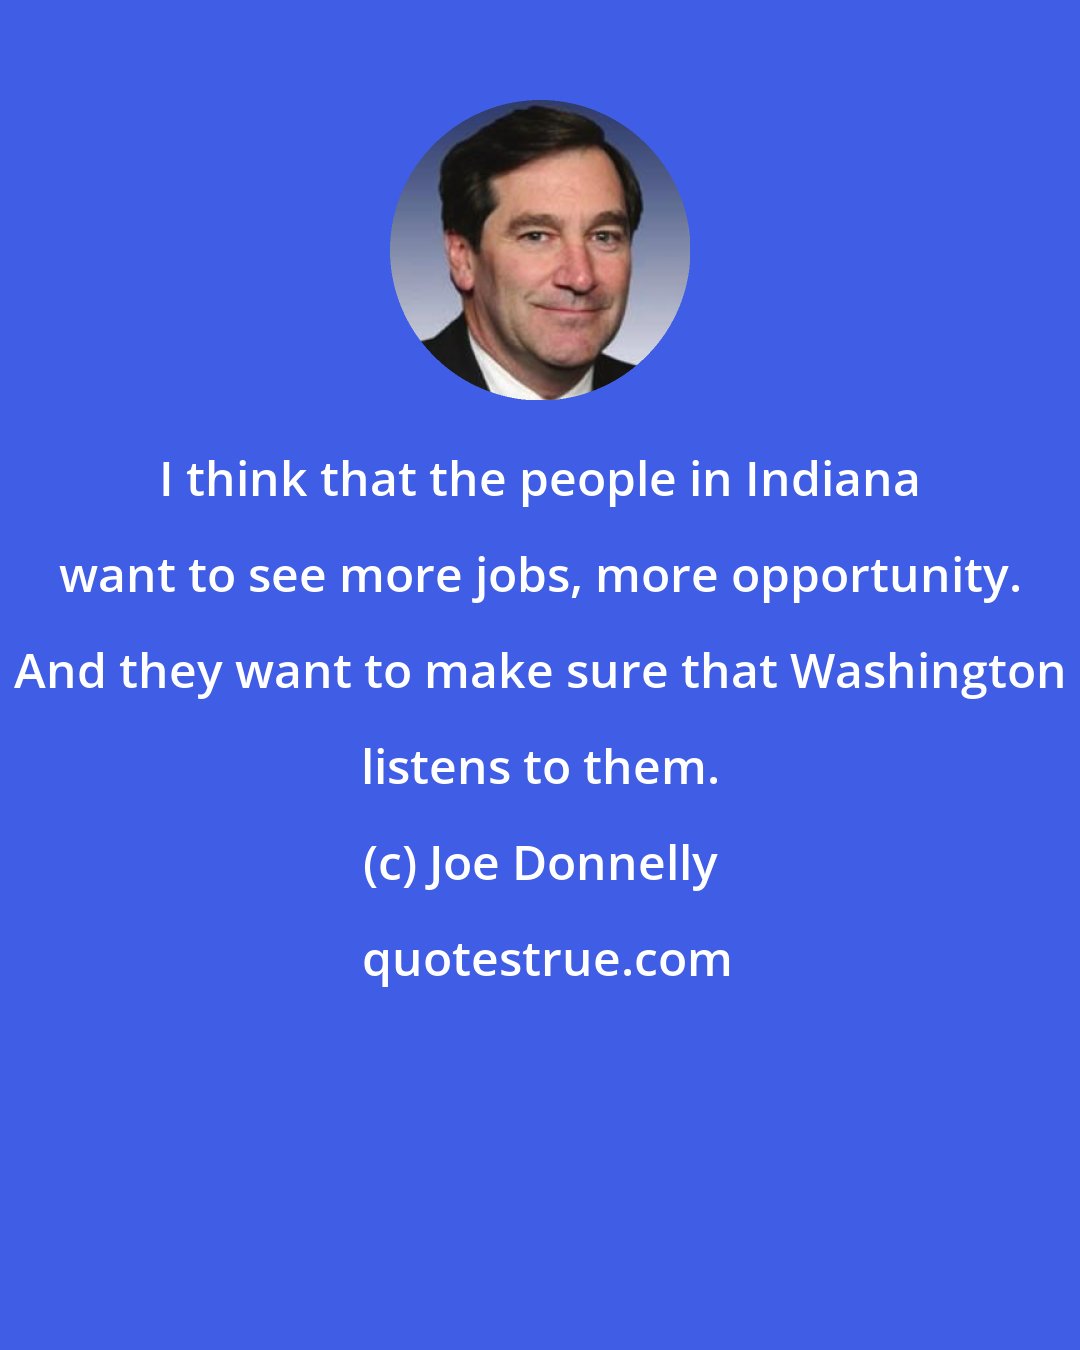 Joe Donnelly: I think that the people in Indiana want to see more jobs, more opportunity. And they want to make sure that Washington listens to them.